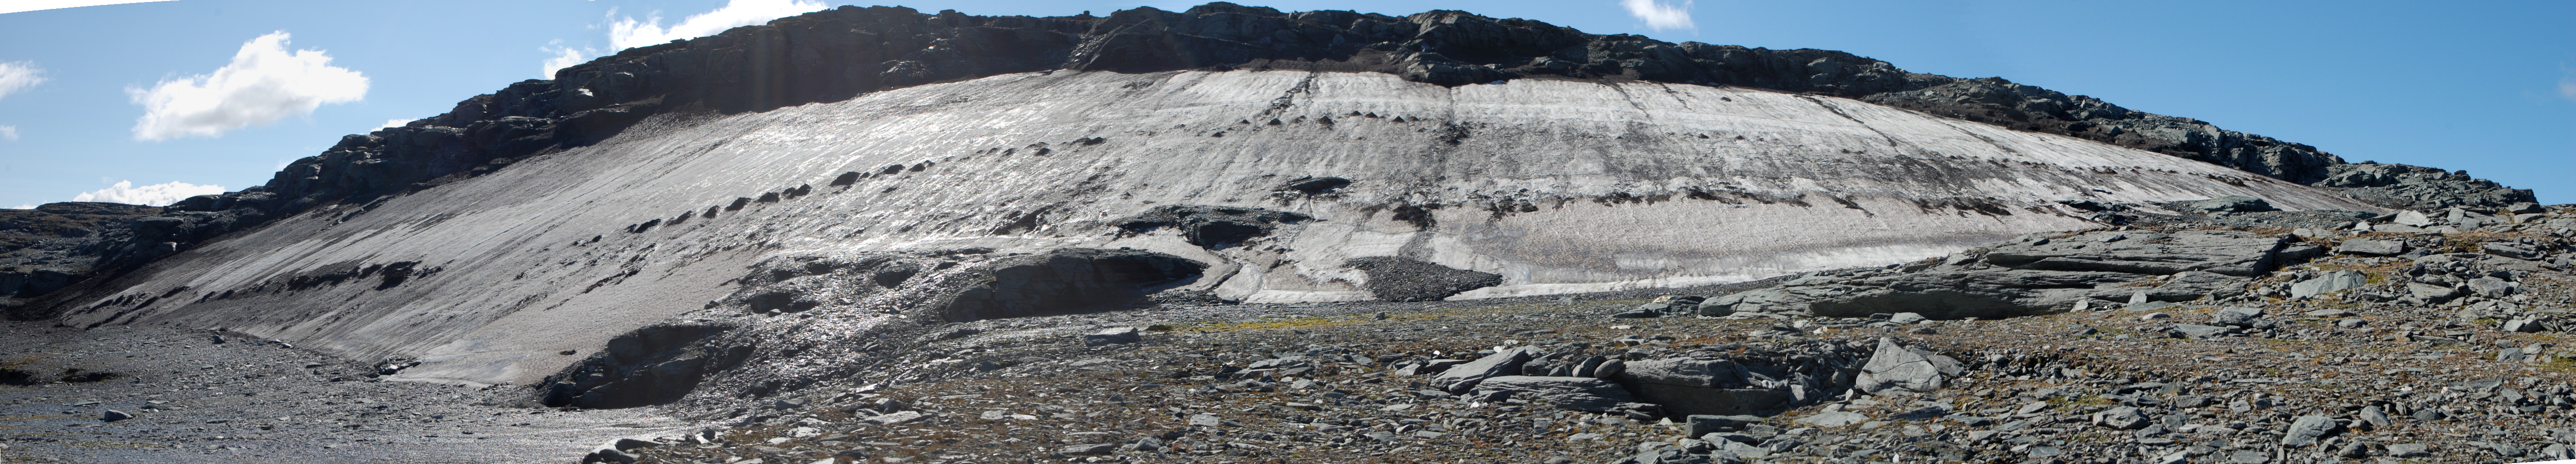 Advanced melting over the whole surface at Kringsollfonna, Oppdal. September 2014. PHOTO: Callanan/SPARC project.